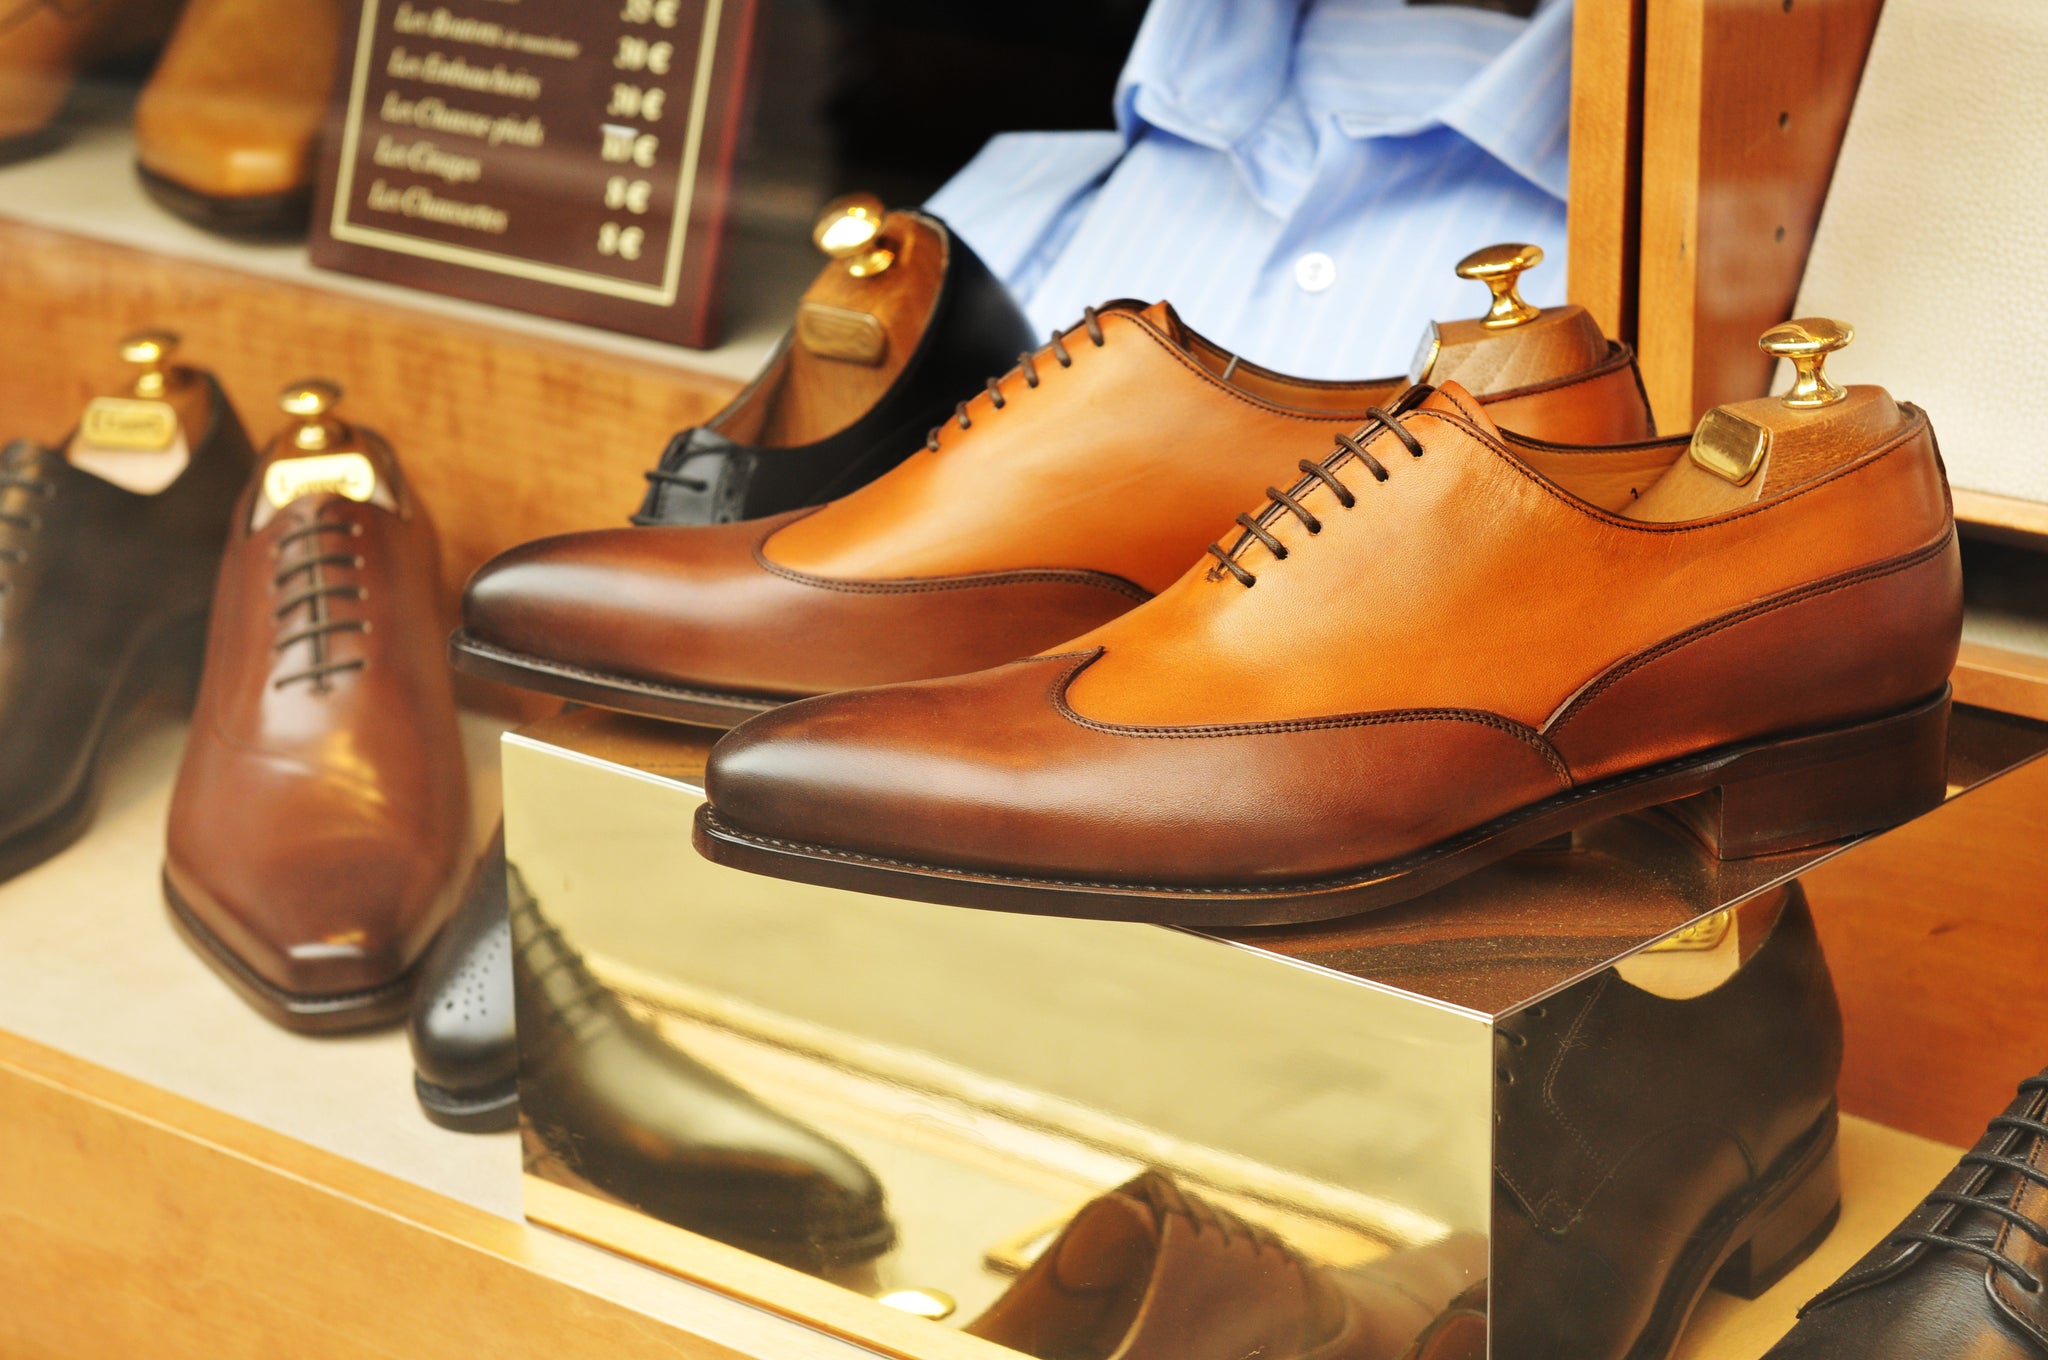 The Five Essential Types of Dress Shoes That Belong in the Male Wardrobe